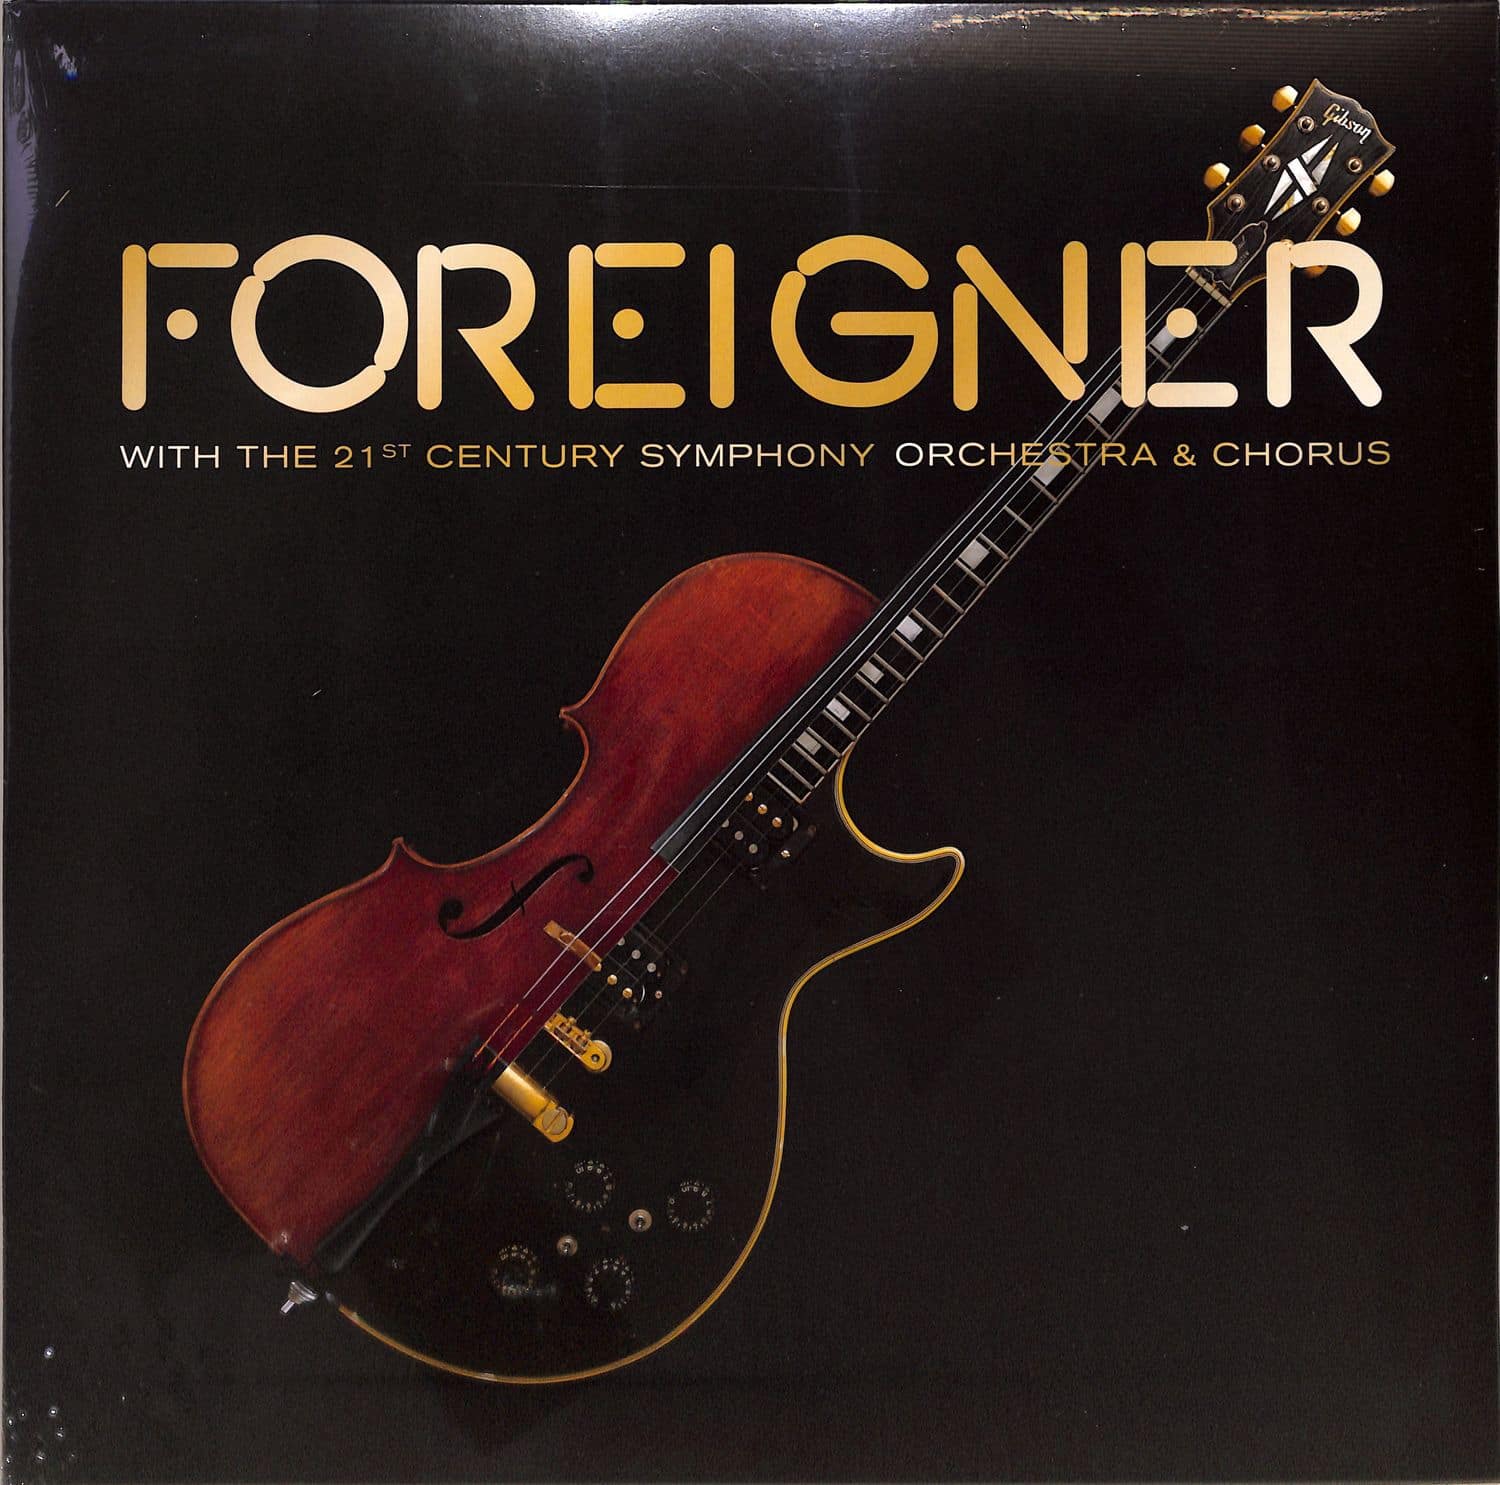 Foreigner - WITH THE 21ST CENTURY SYMPHONY ORCHESTRA & CHORUS 